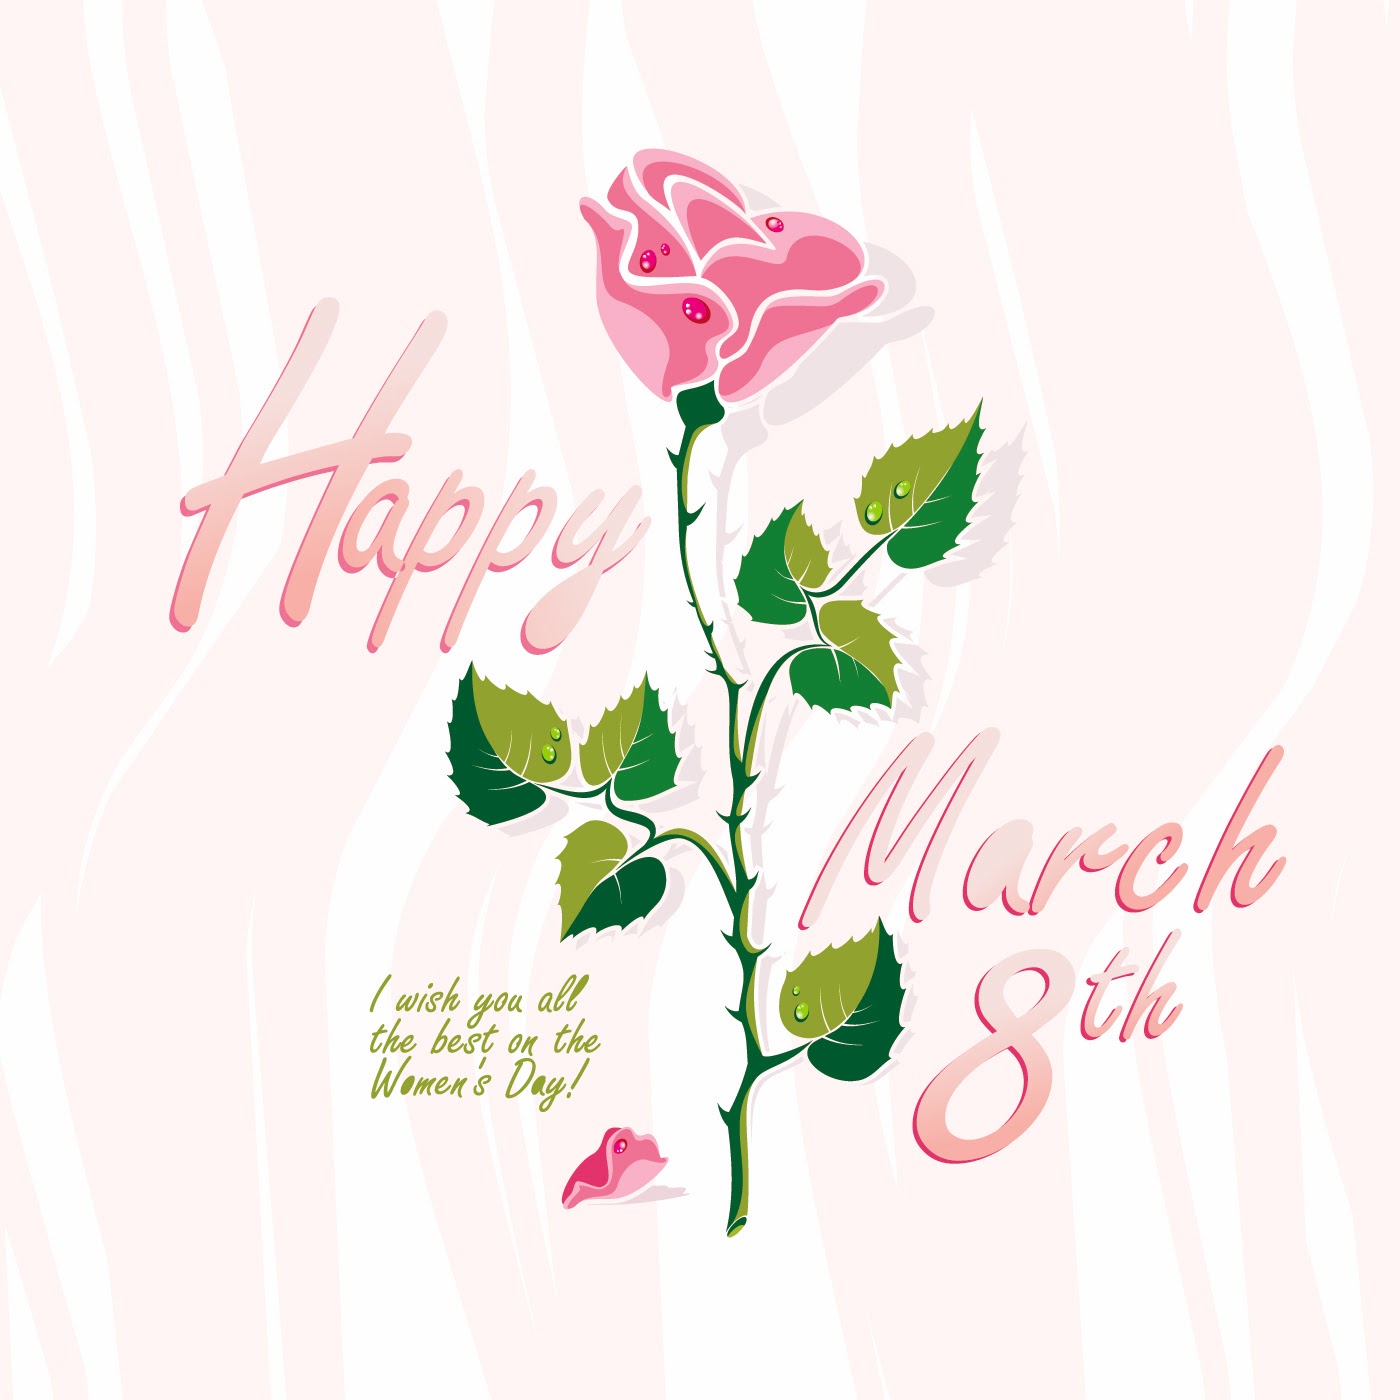 March 2014 International Women S Day Greetings Cards With Message